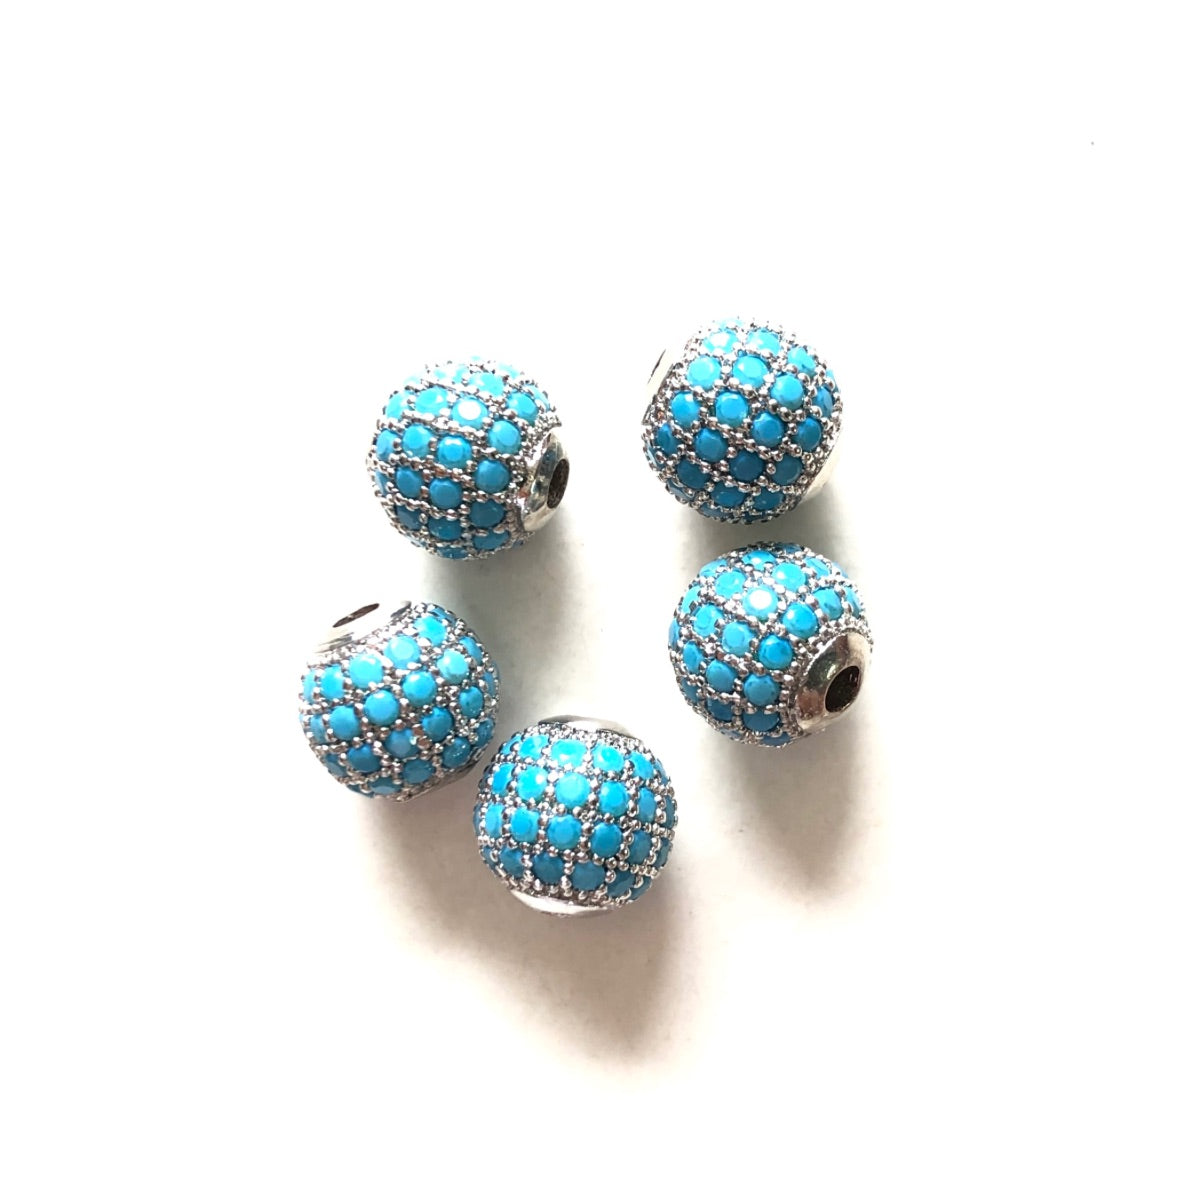 10pcs/lot 6mm, 8mm Colorful CZ Paved Ball Spacers Silver Turquoise CZ Paved Spacers 6mm Beads 8mm Beads Ball Beads Colorful Zirconia New Spacers Arrivals Charms Beads Beyond